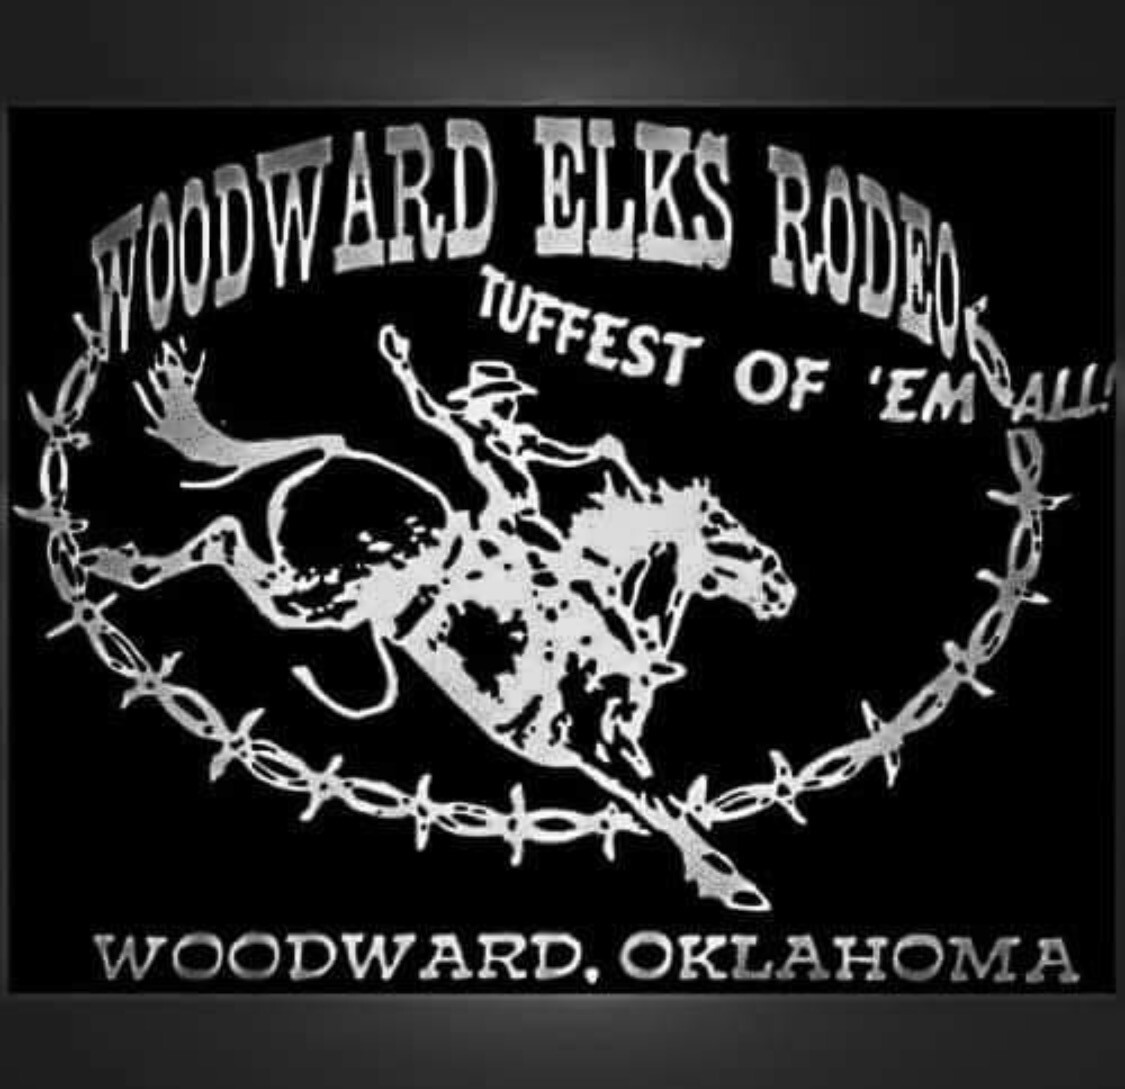 Woodward Elks Rodeo (Friday And Saturday - RODEO ONLY) *DOES NOT INCLUDE DANCE June 10-11 2022